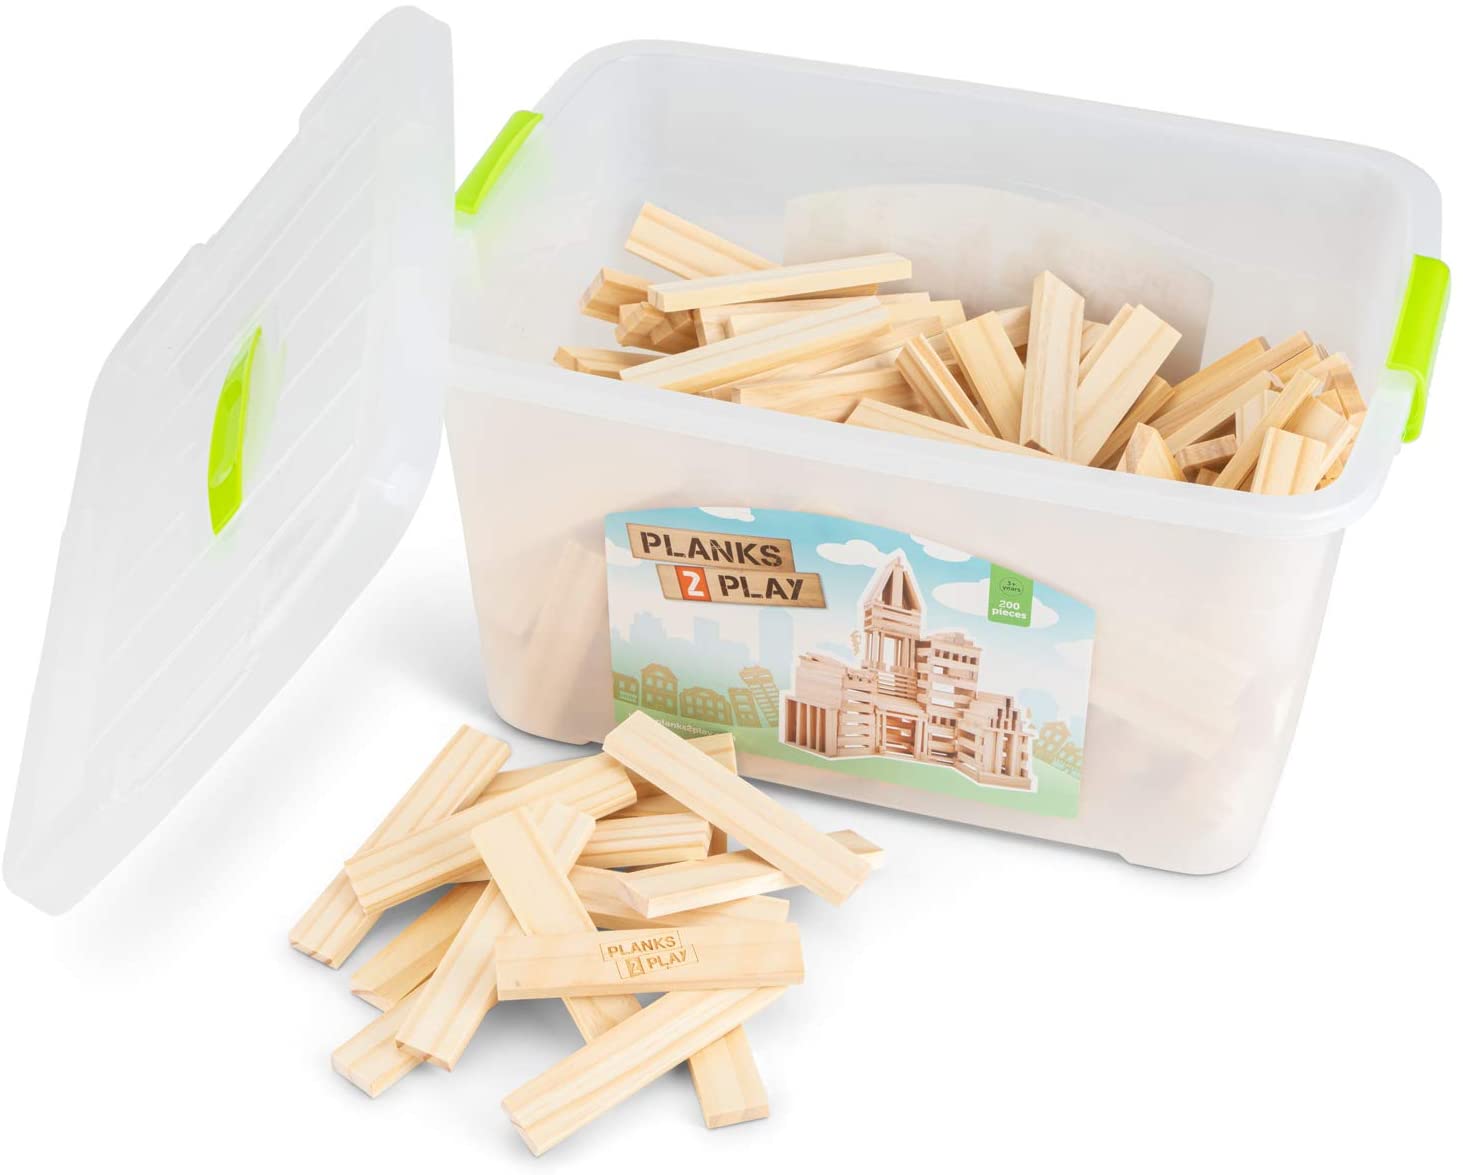 New Classic Toys 2 Play-Wooden Planks, 200 Pieces, P2P0200, Natural, Pieces